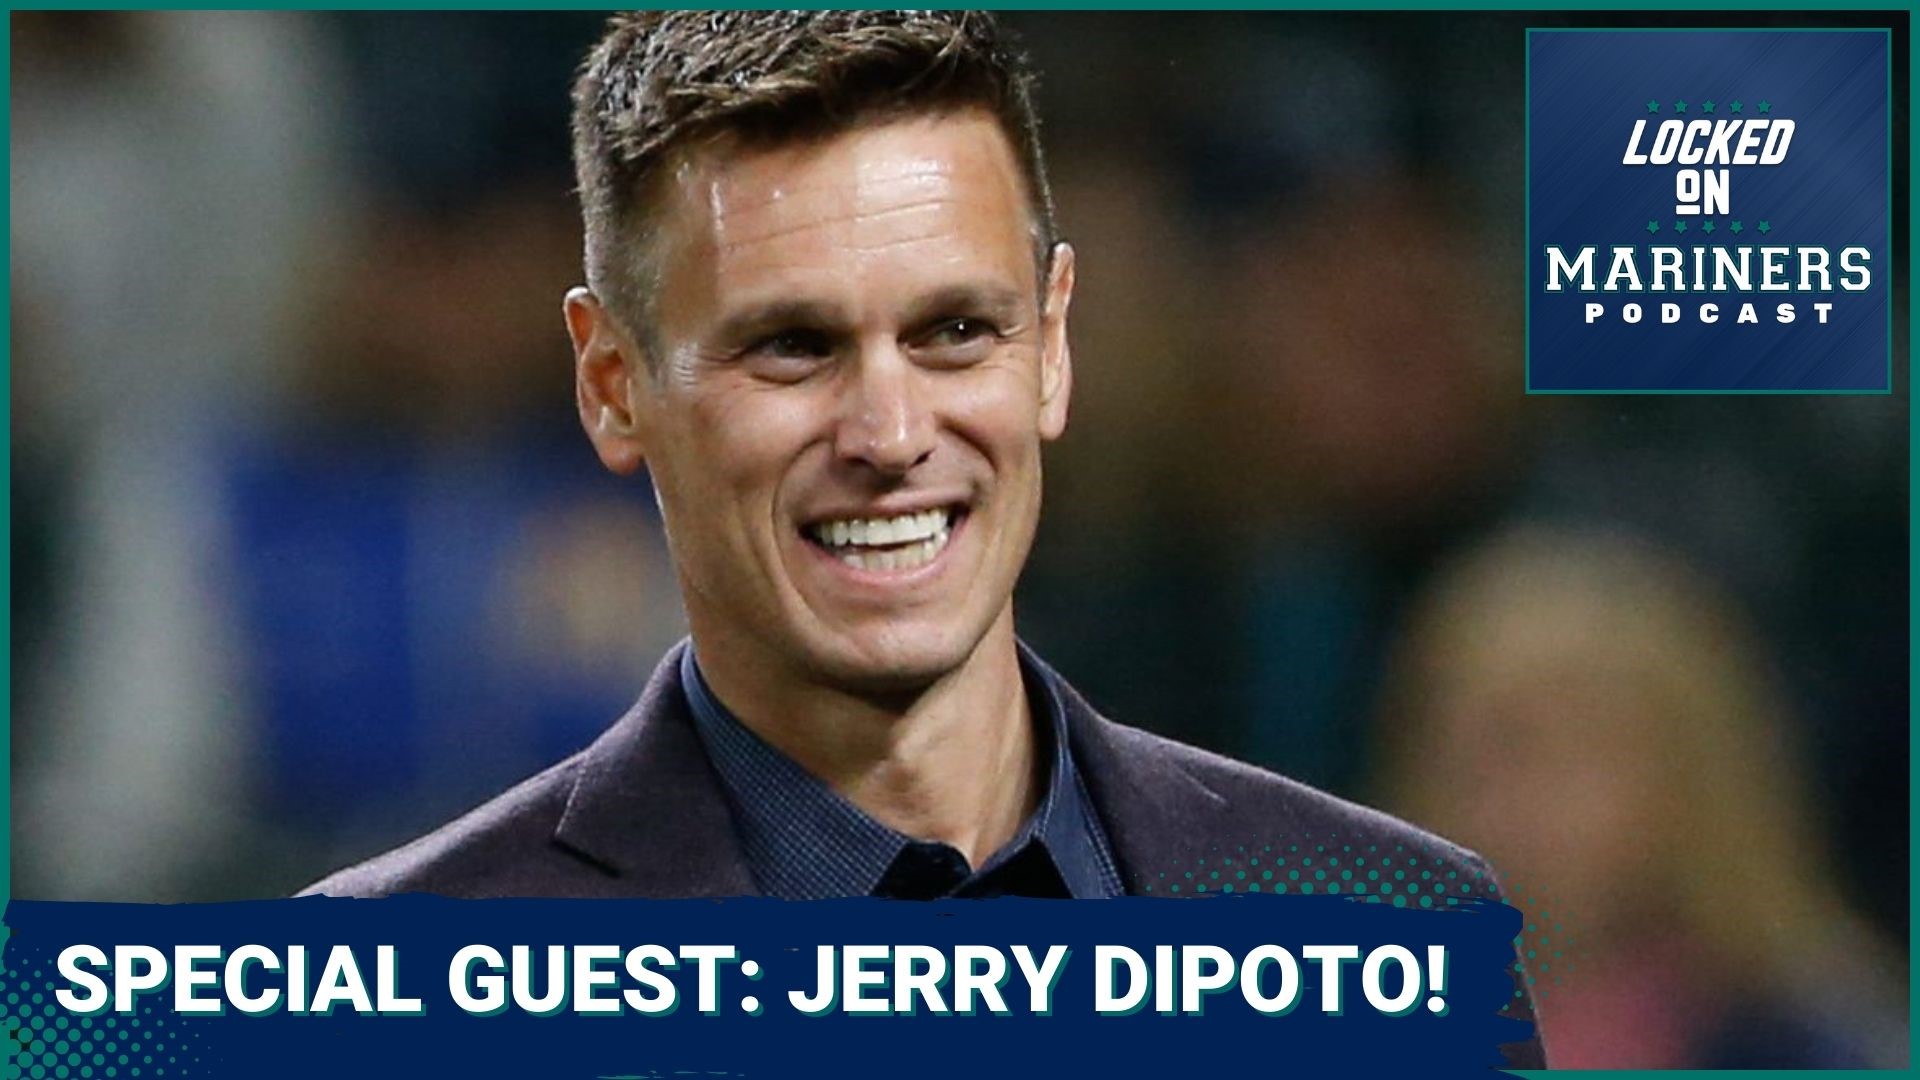 A big key in Seattle's recent success, President of Baseball Operations Jerry Dipoto joined the Locked On Mariners podcast to talk all things Mariners.